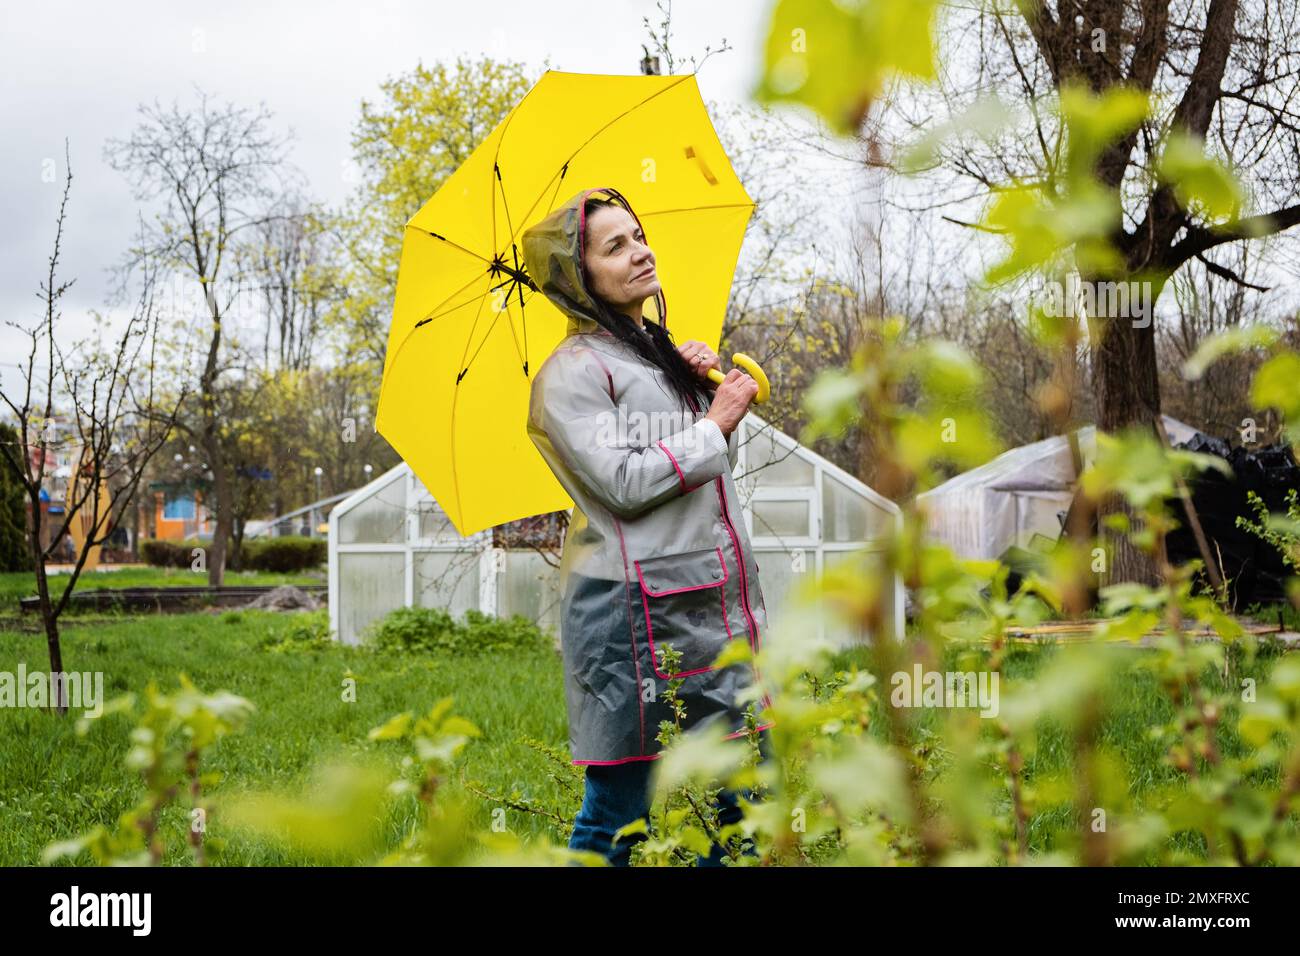 Coping with stress and anxiety. Practicing mindfulness and relaxation techniques. Happy senior woman in yellow rain coat with yellow umbrella walking Stock Photo